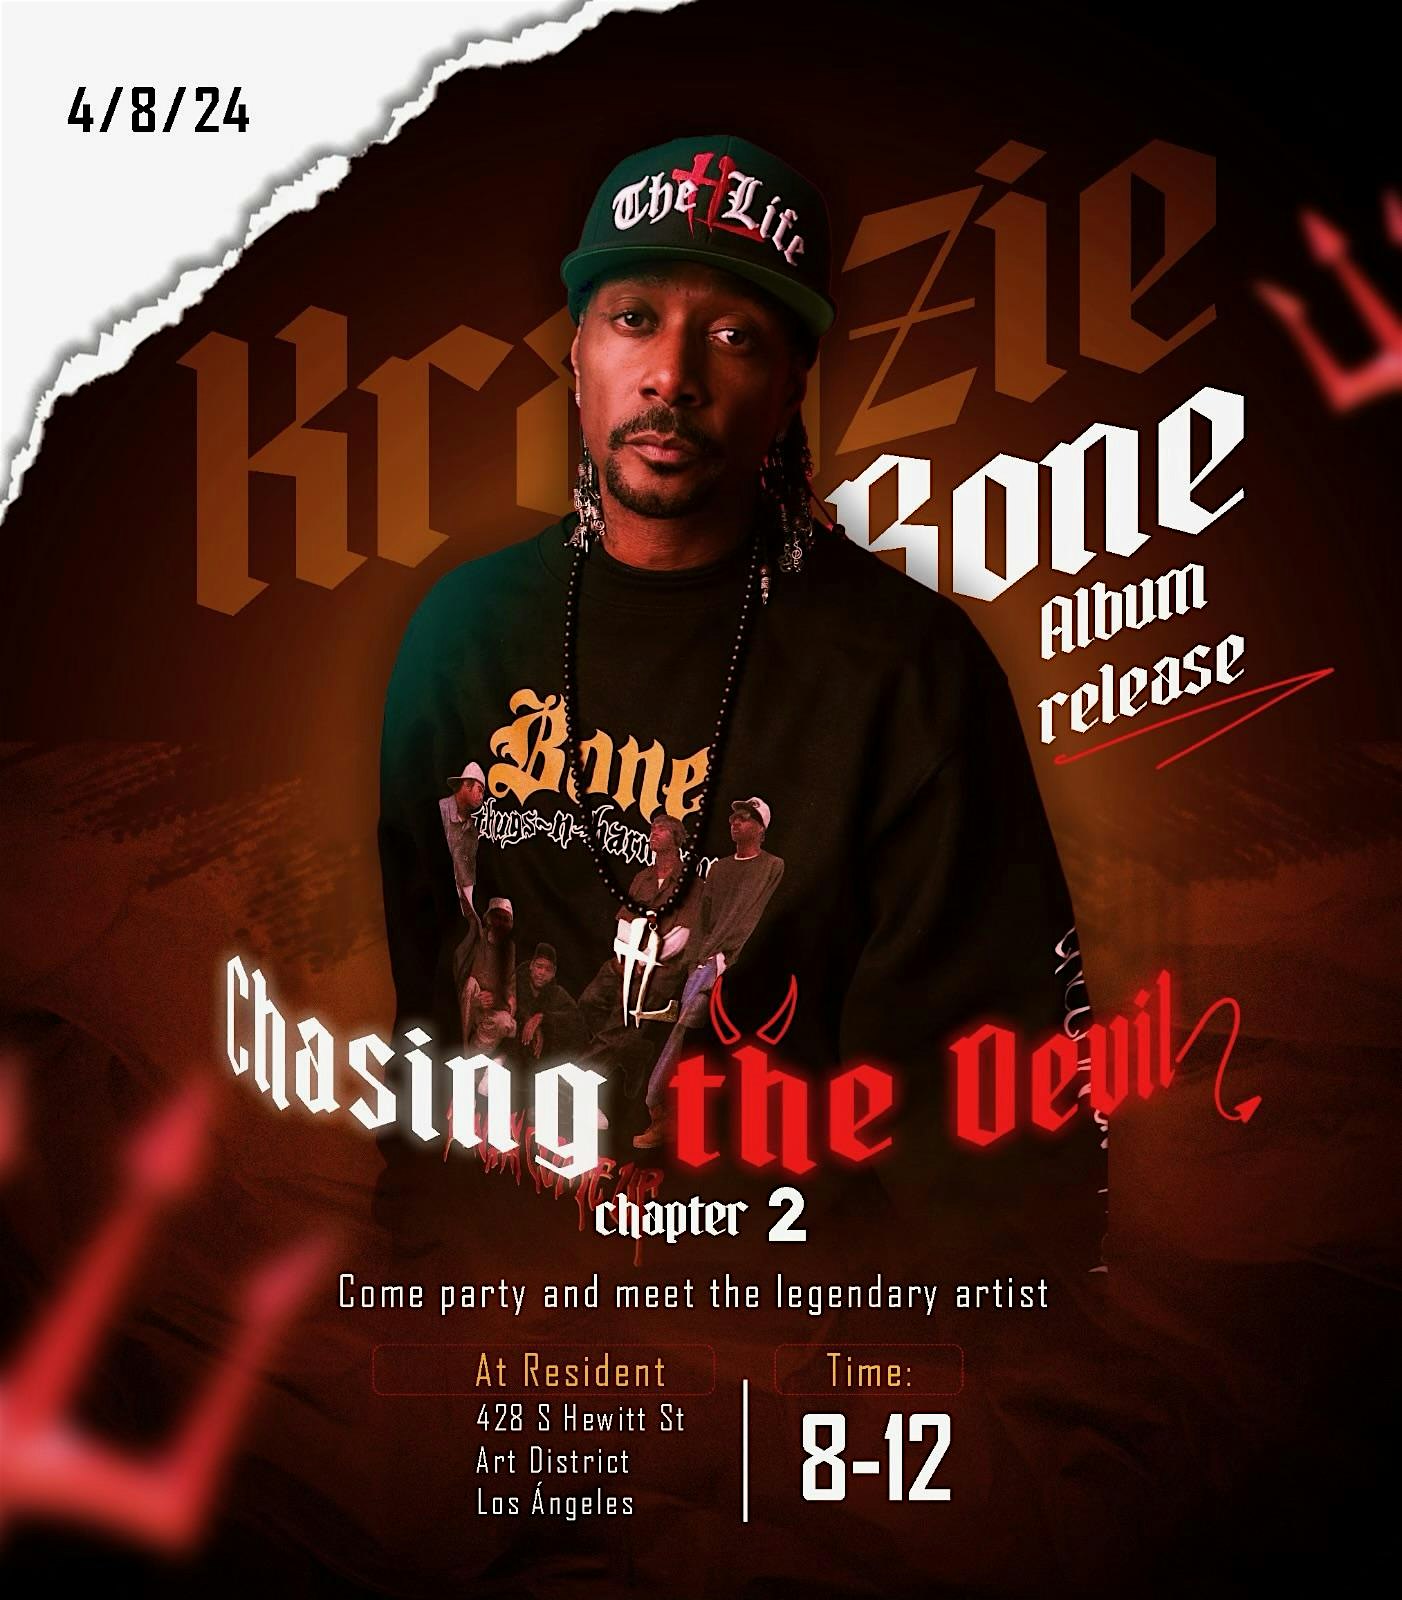 Krayzie Bone: Chasing the Devil Chapter 2 Album Release Party